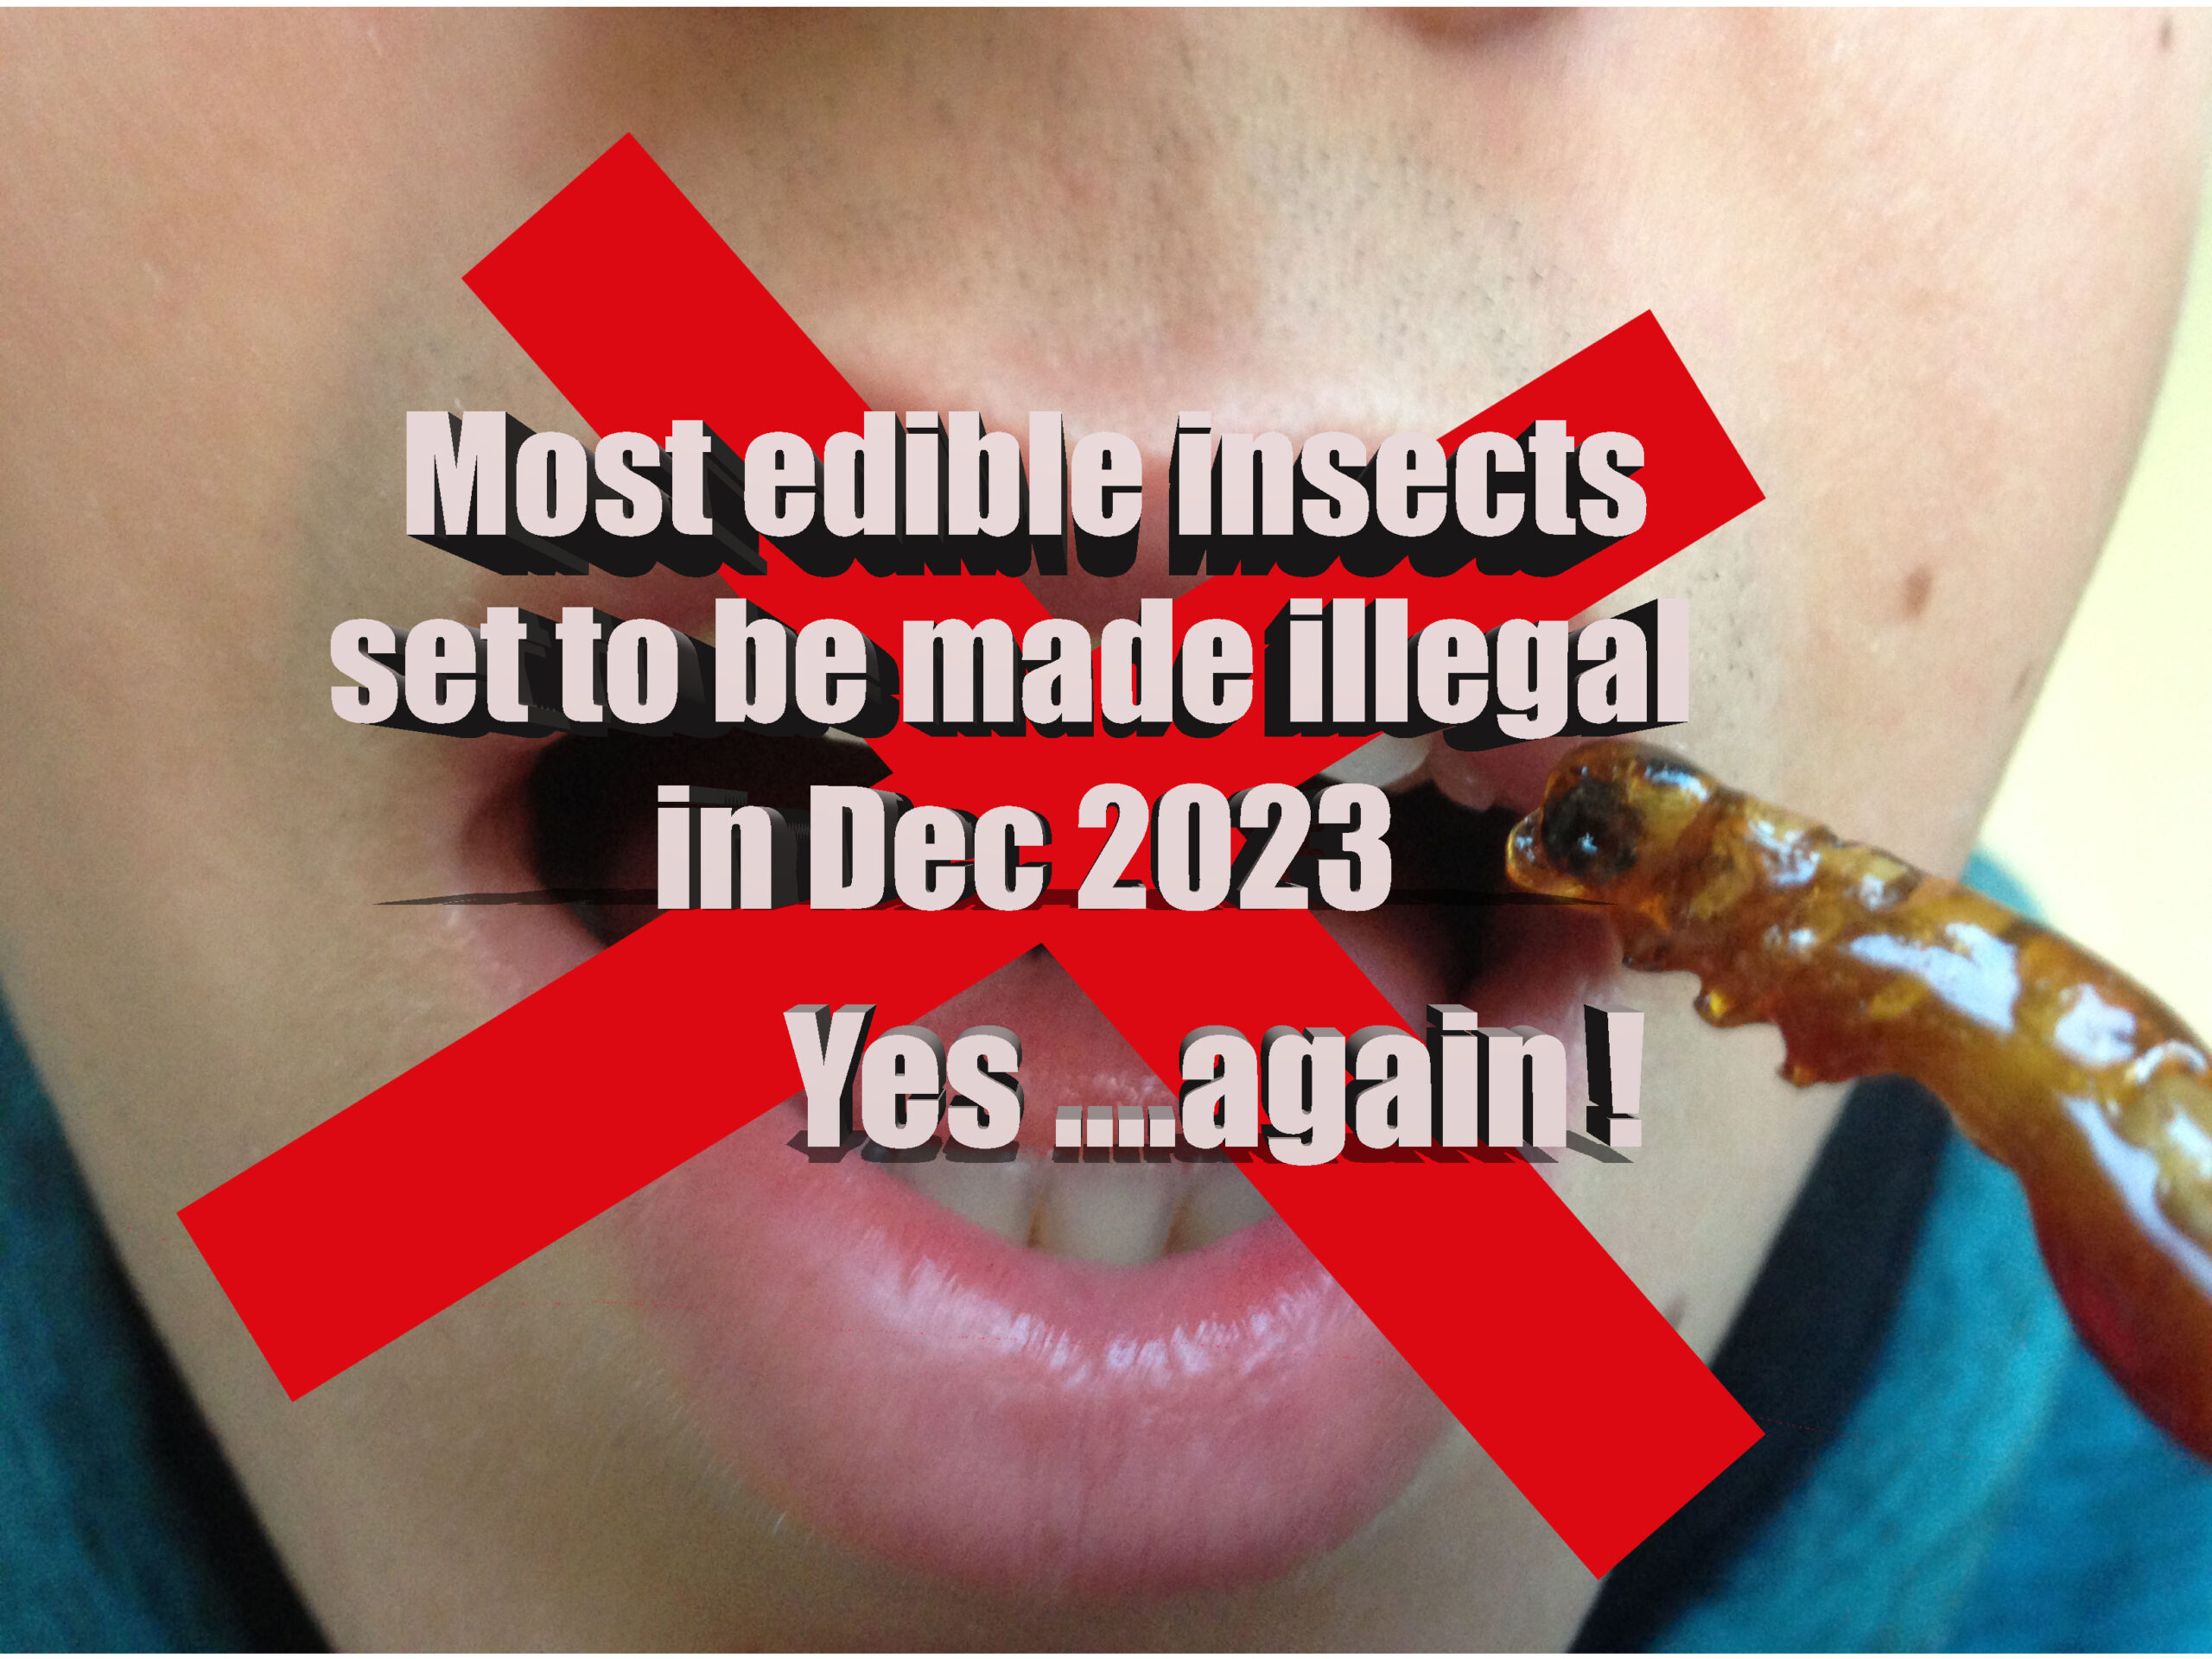 Edible insects legal status 2023